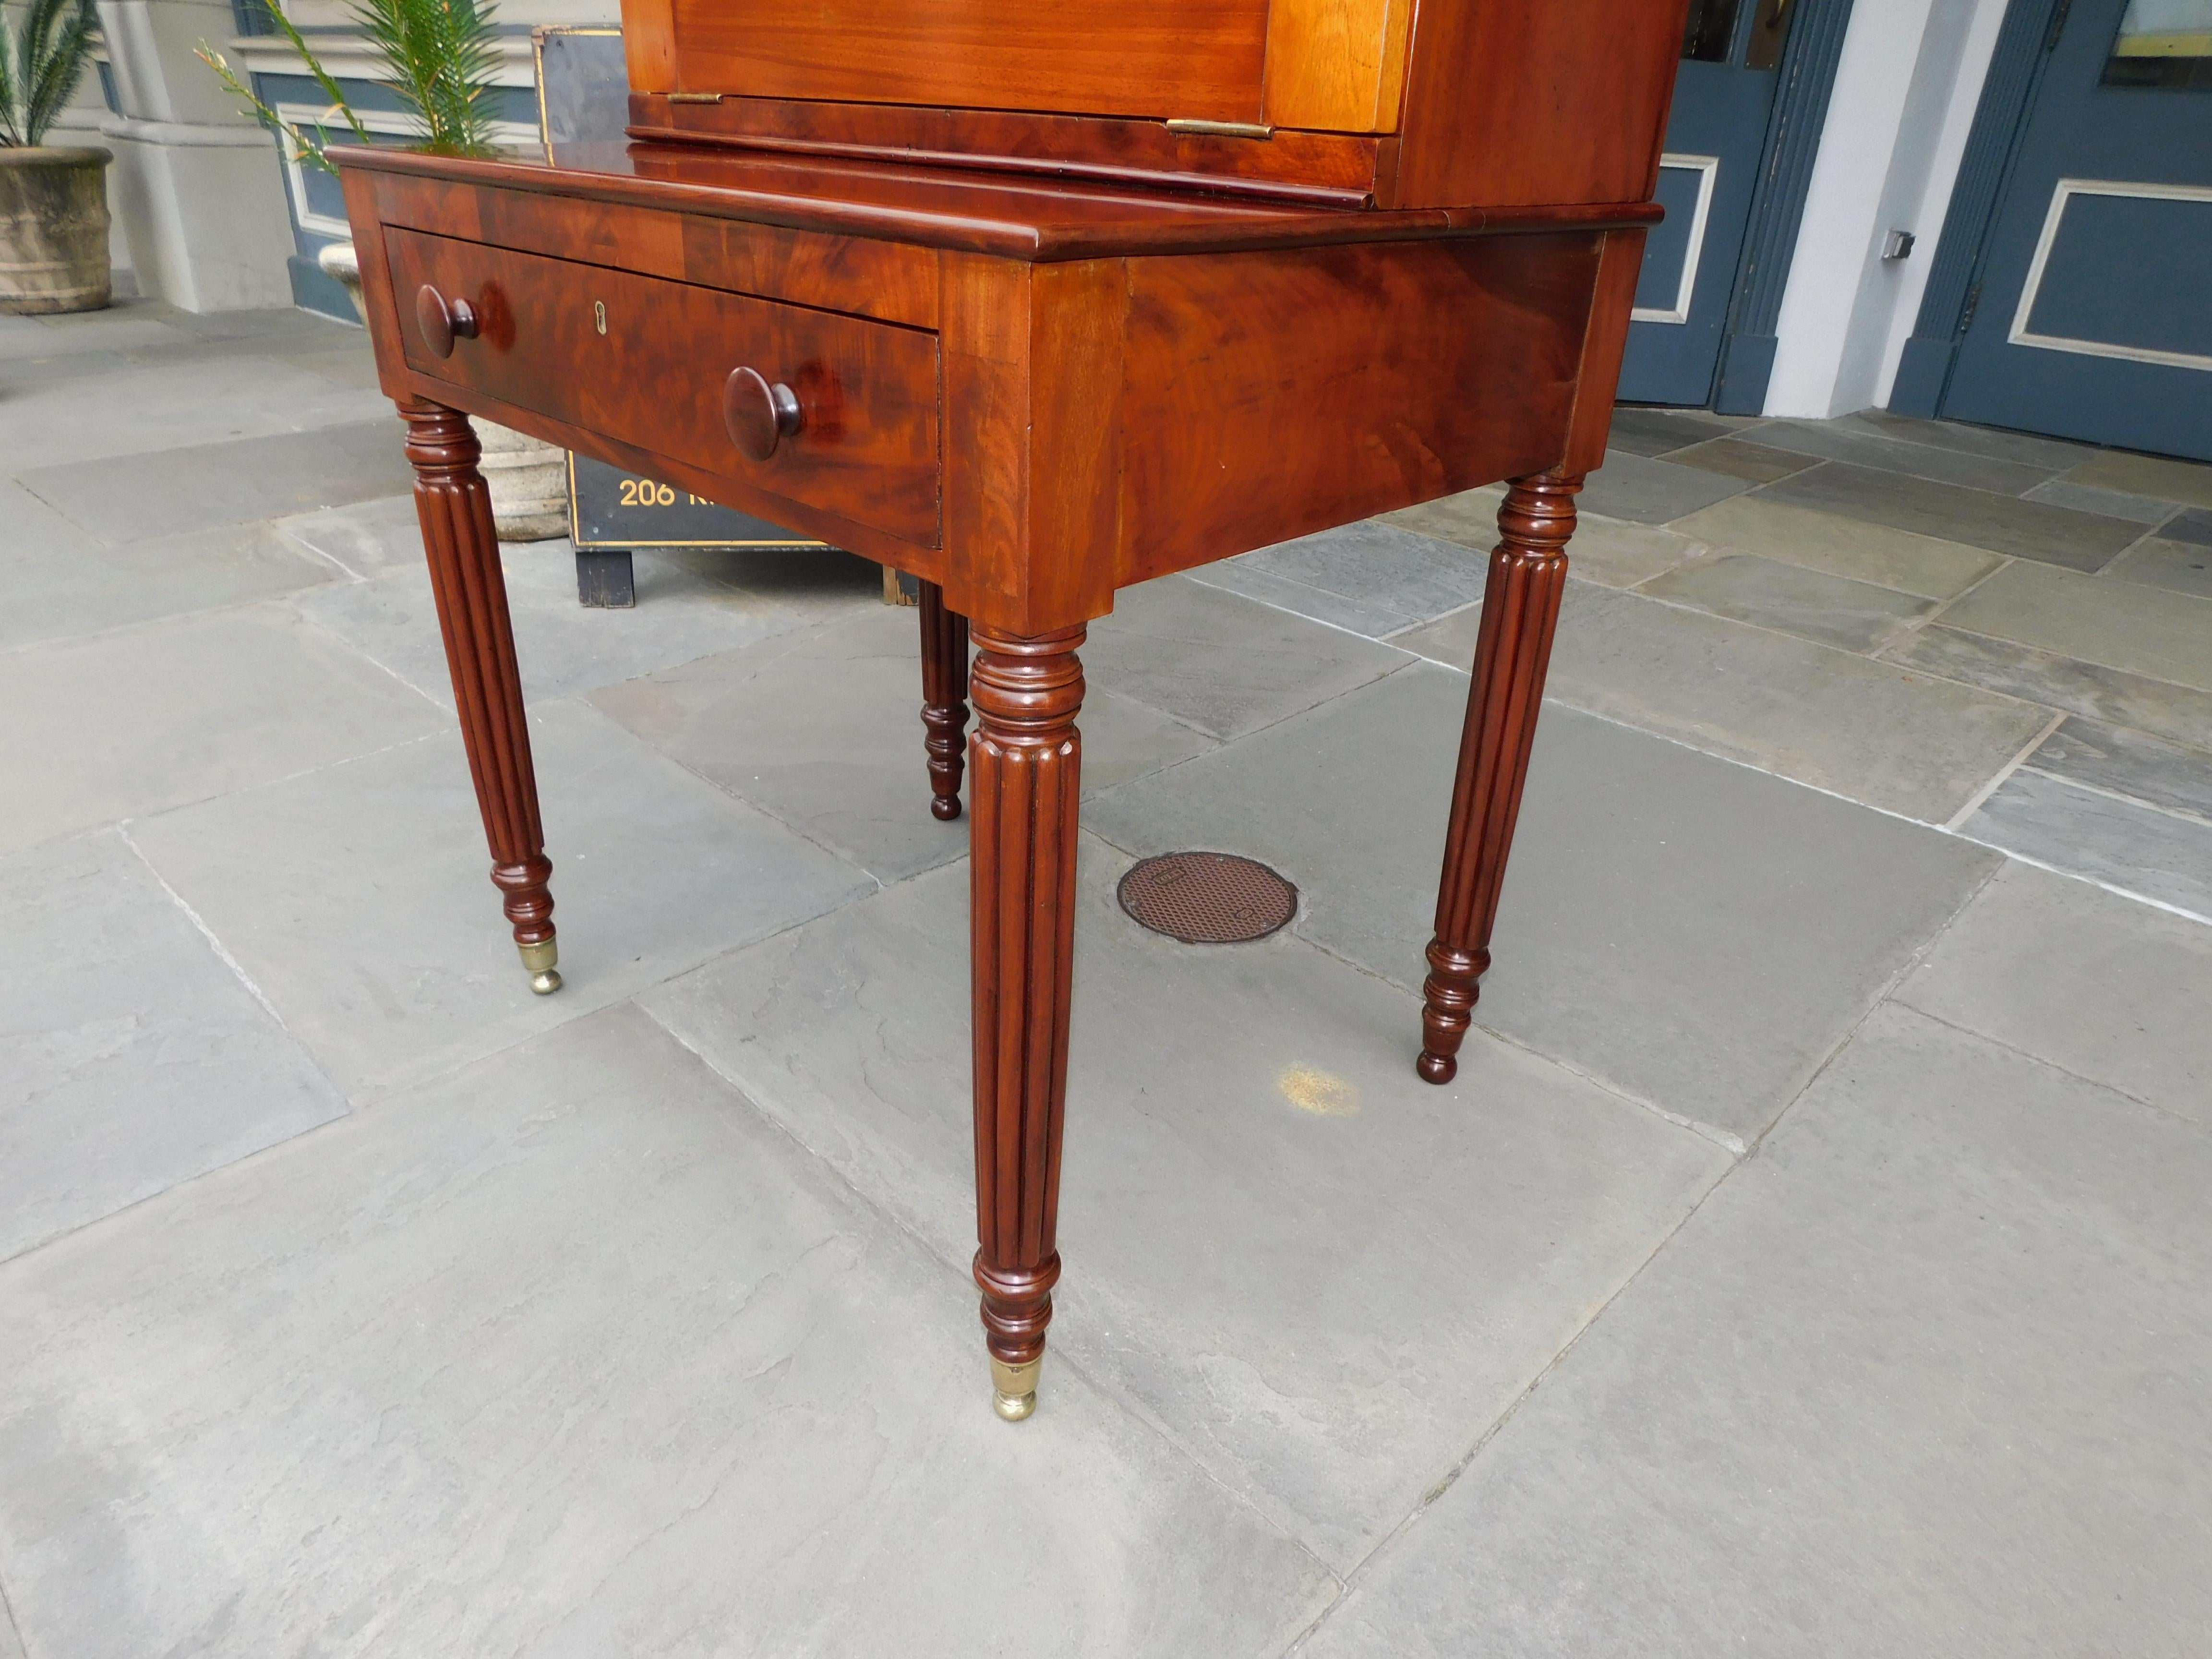 American Southern Mahogany and Leather Plantation Desk with Reeded Legs, C. 1810 For Sale 2